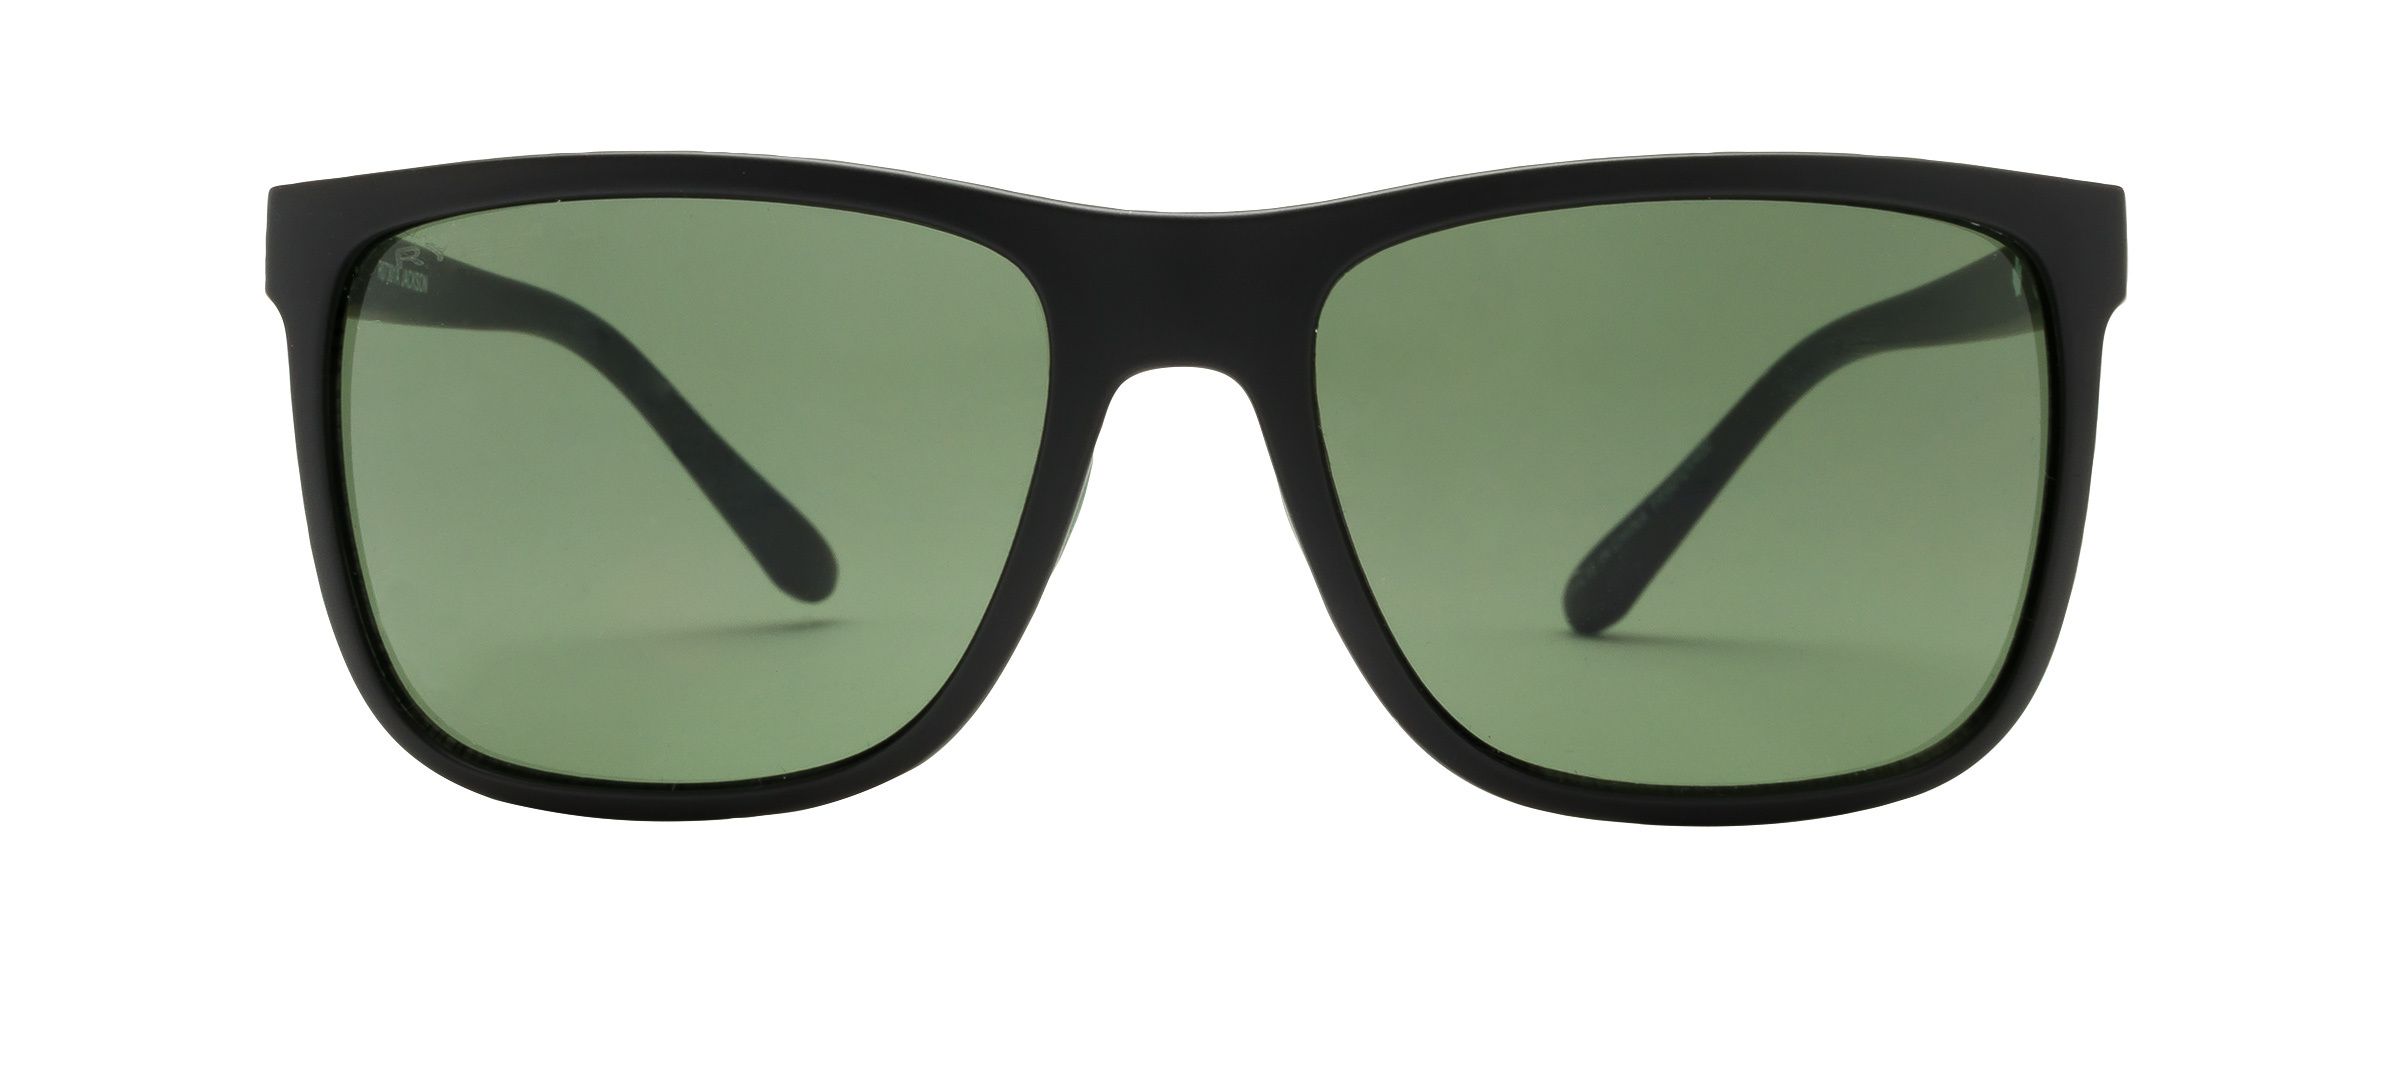 Men's Sunglasses - buy online | Clearly